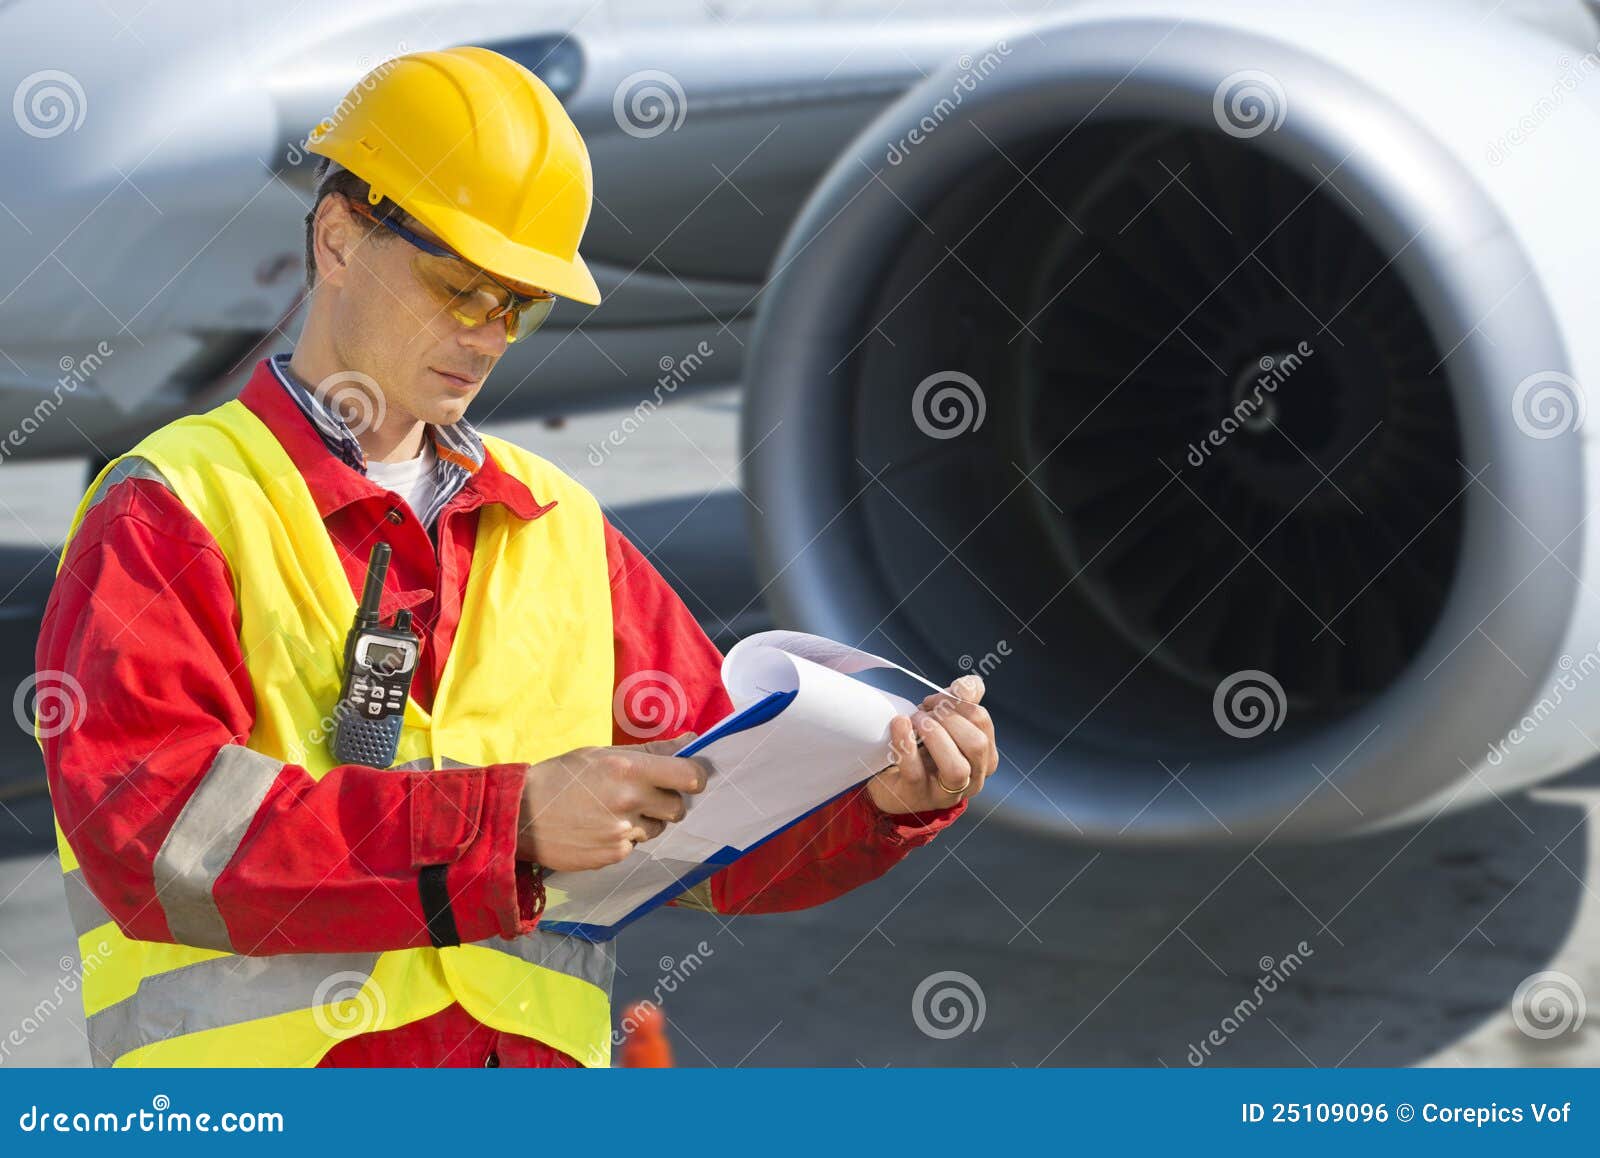 Airline health and safety jobs